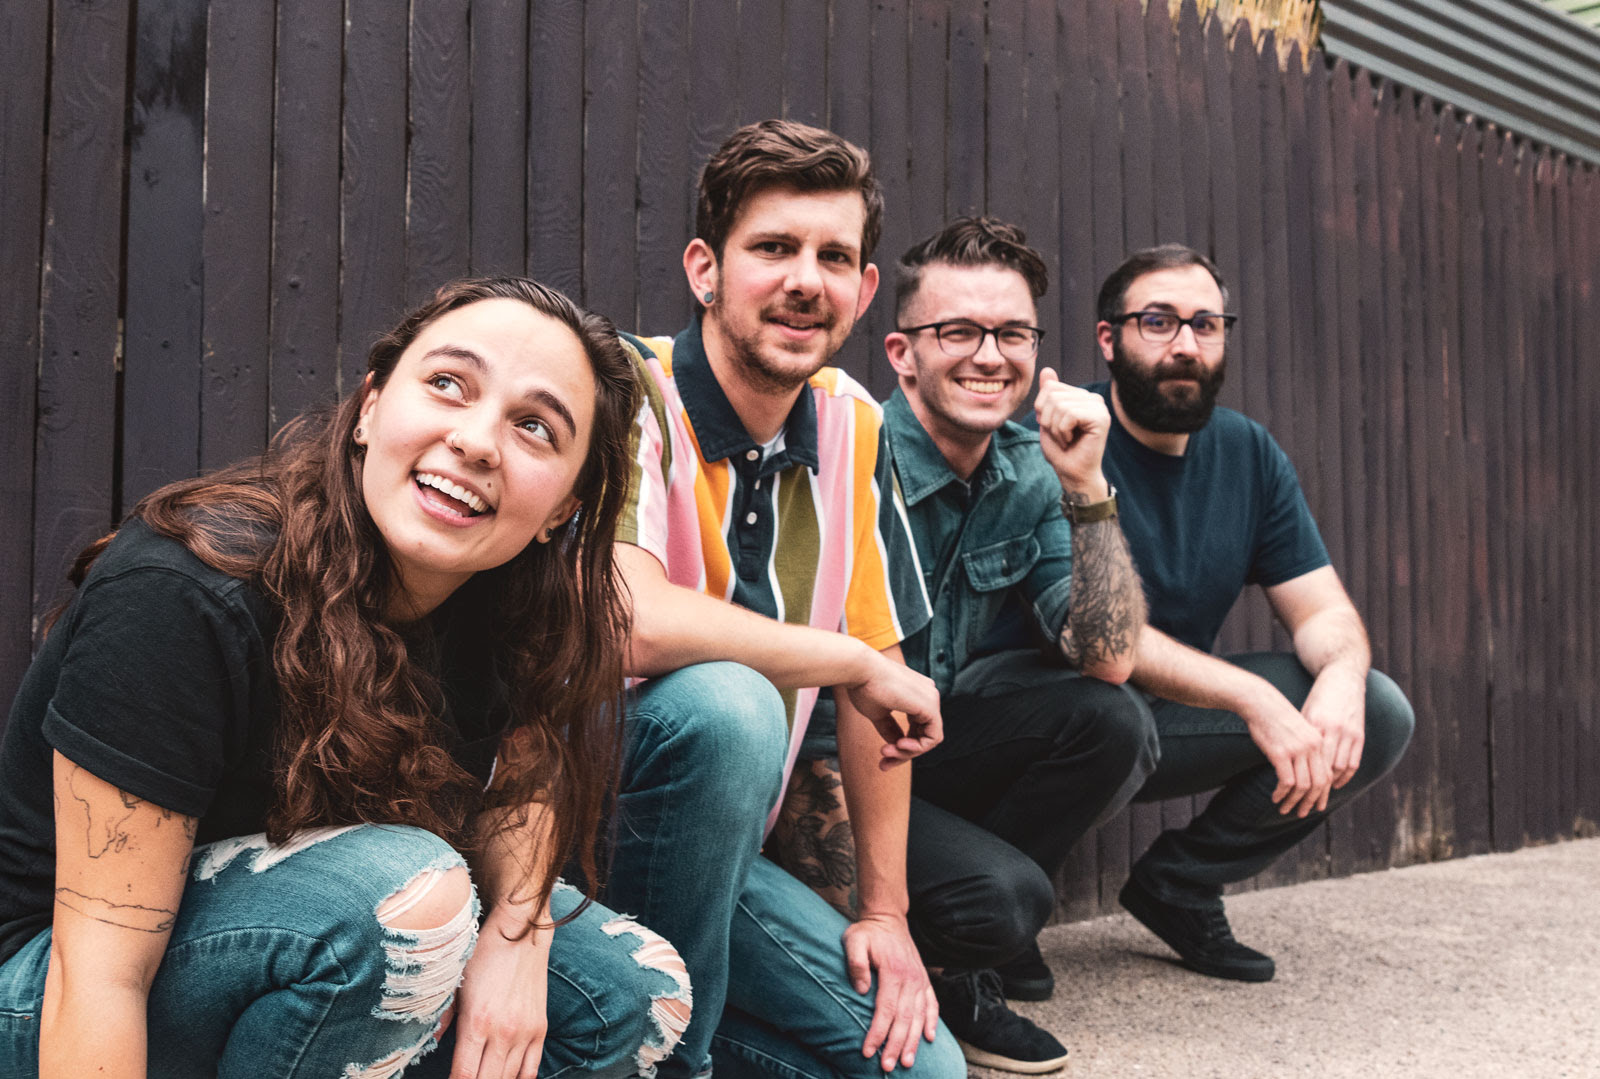 WATCH: Indie punk act Sincere Engineer release new video for ‘Tourniquet’